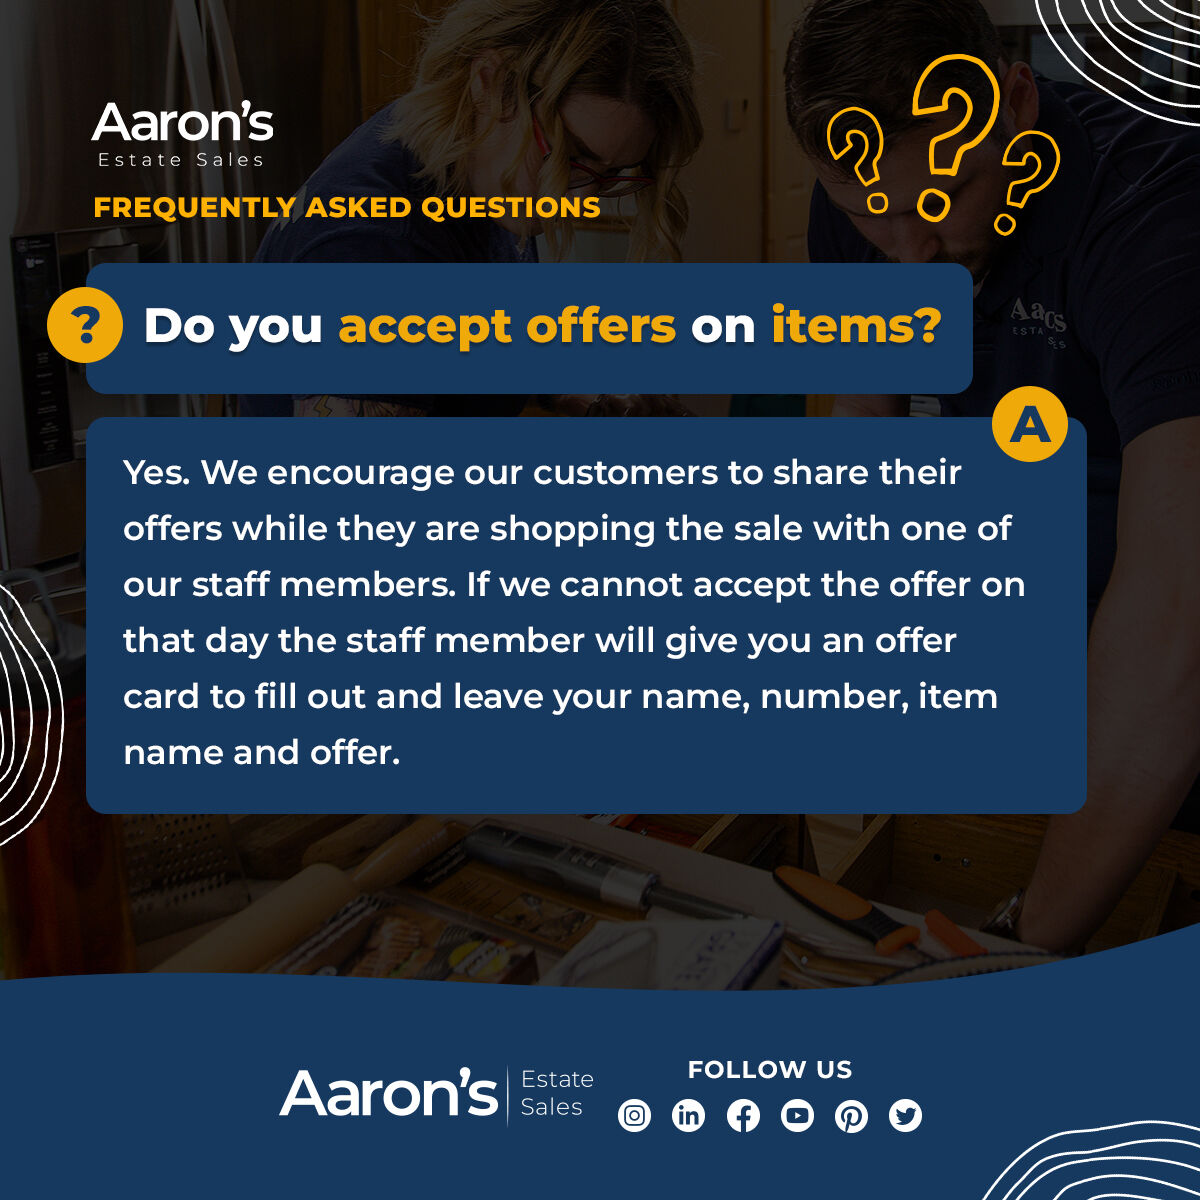 Got your eye on something special? 

💫 We accept offers at our sale! 

🛍️ Just chat with our friendly staff and let's make a deal happen! 

🔗aaronsestatesales.com/faqs/

#SaleOffers #LetUsKnow #OfferAccepted #Negotiation #MakeAnOffer #DealMaking #PriceNegotiation #BargainHunting